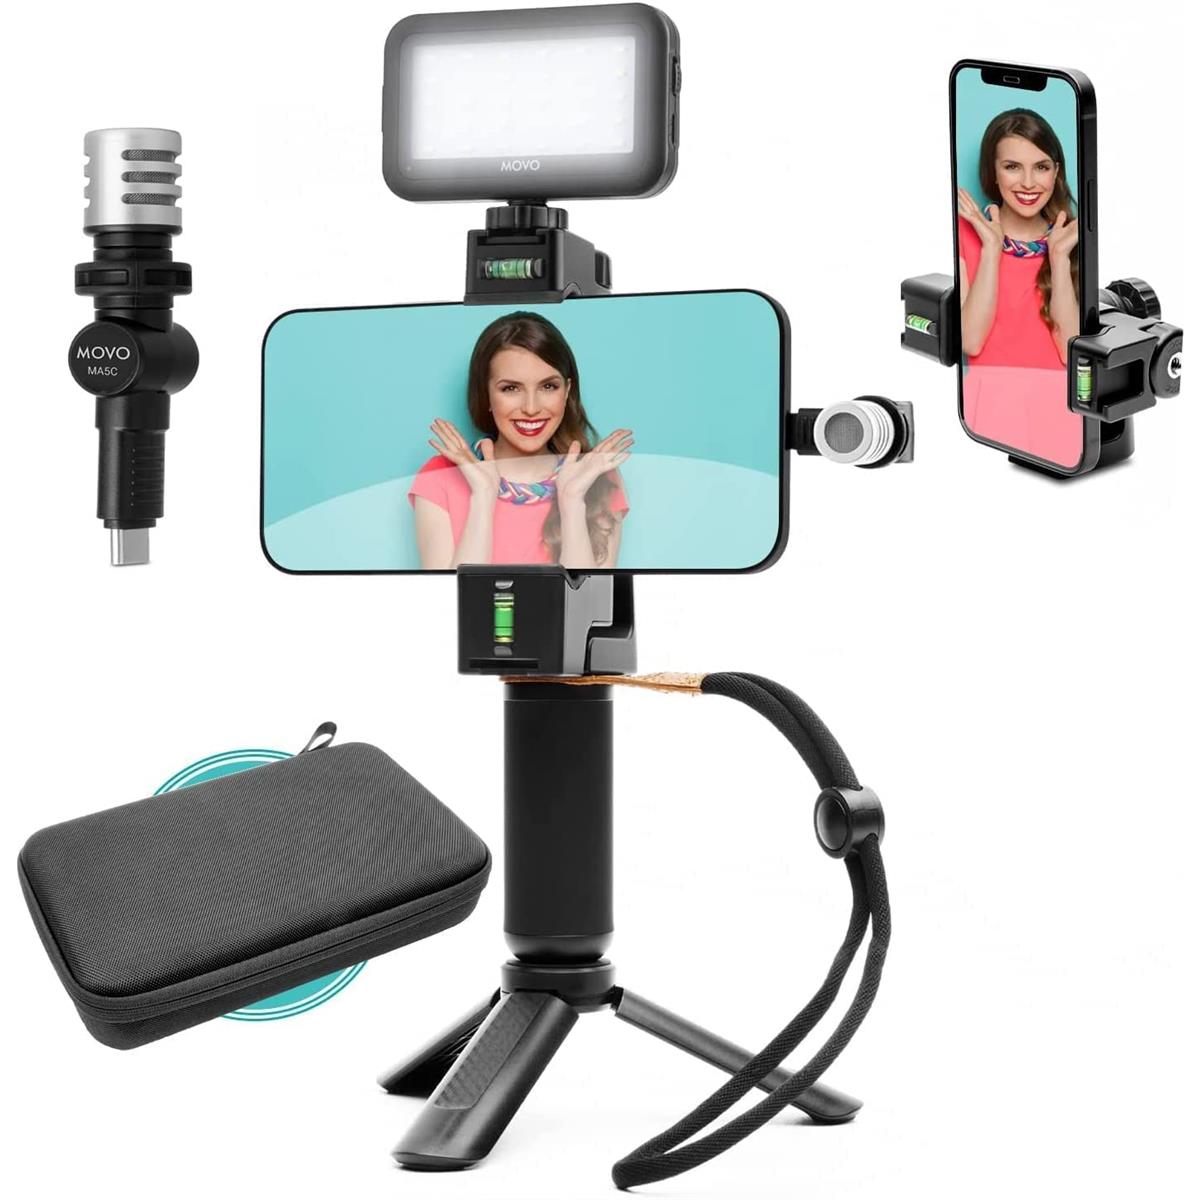 Image of Movo Photo uVlog Starter Vlogging Kit w/USB-C Microphone for Android Smartphone